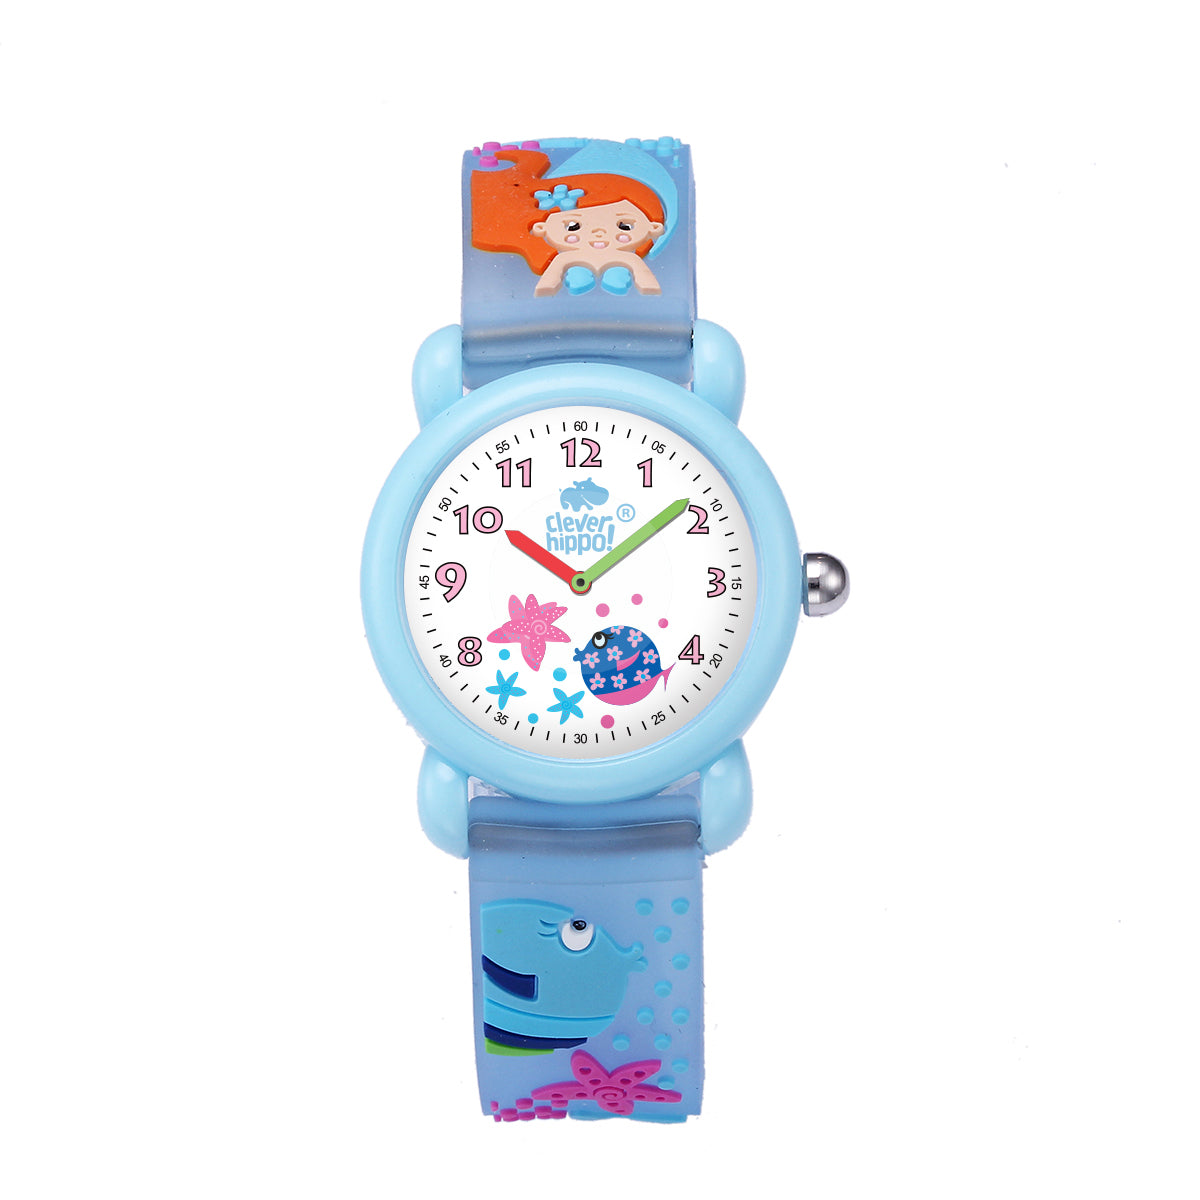 Đồng Hồ CLEVER HIPPO Clever Watch - Mermaid Xanh WG004